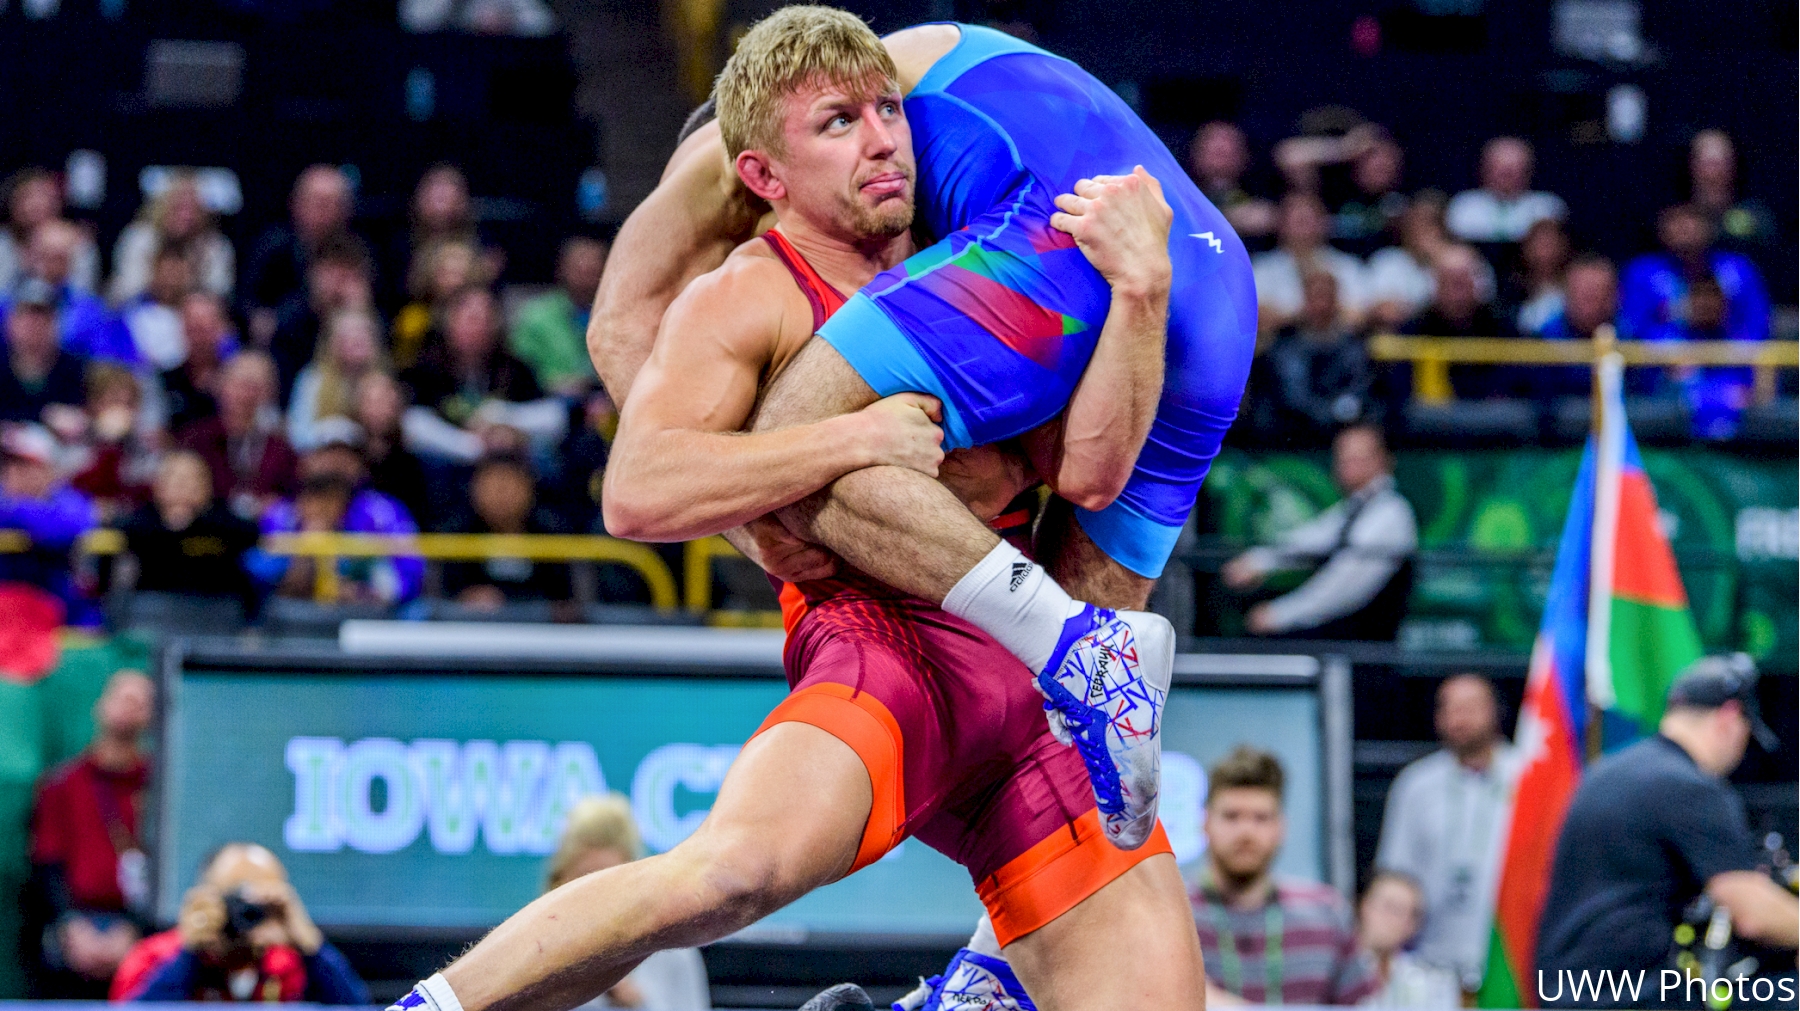 See the results for the 2021 PanAm Championships wrestling event on